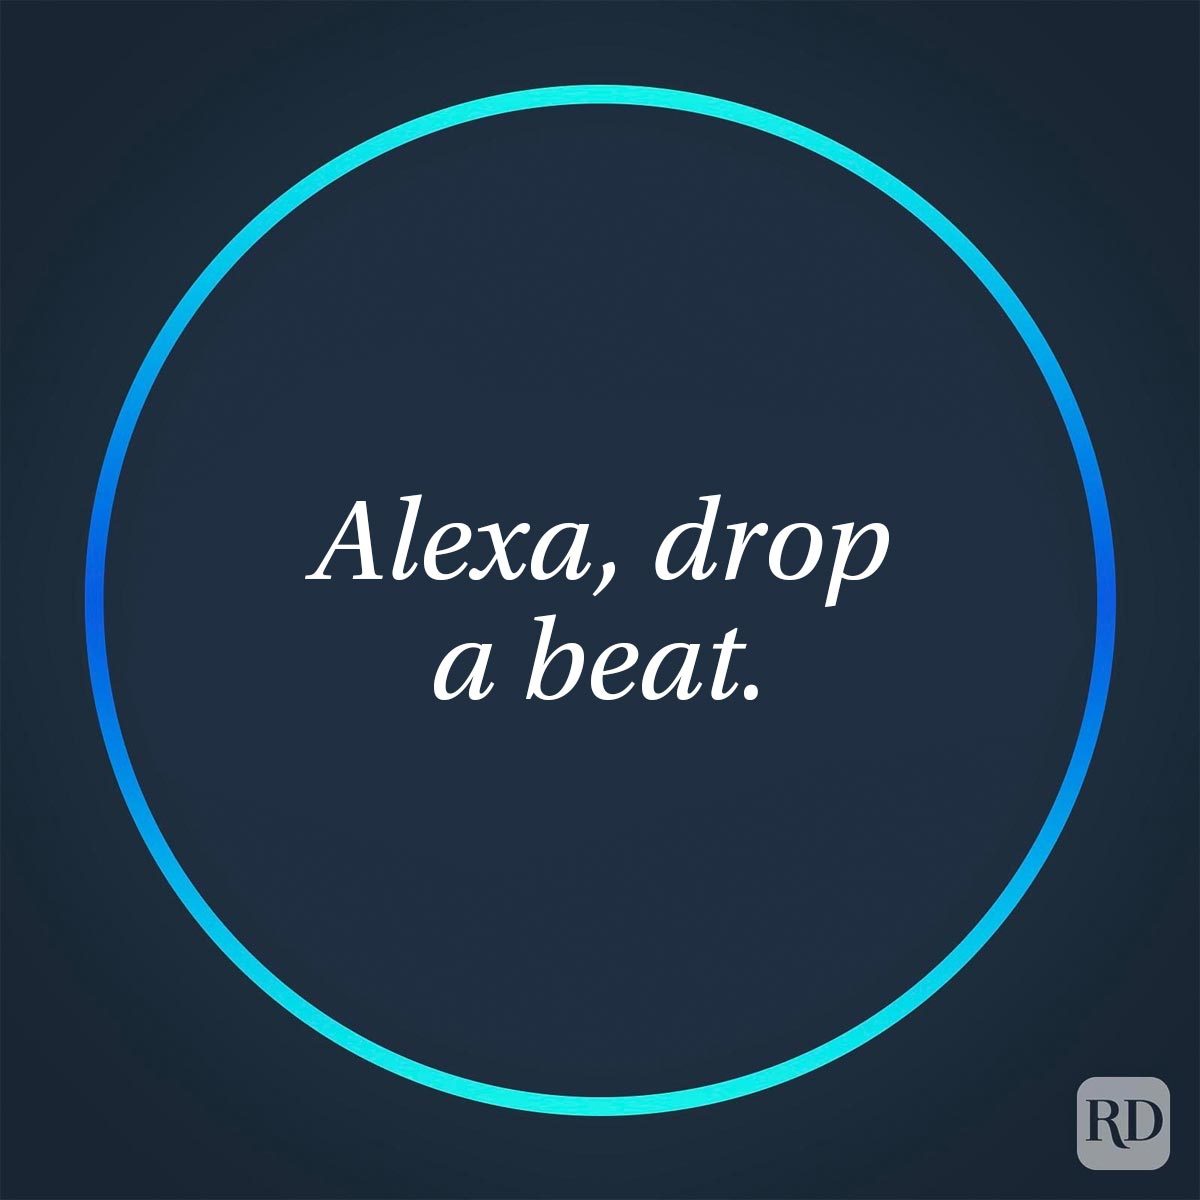 Funny Things To Ask Alexa For A Good Laugh glowing circle with an Alexa question in center